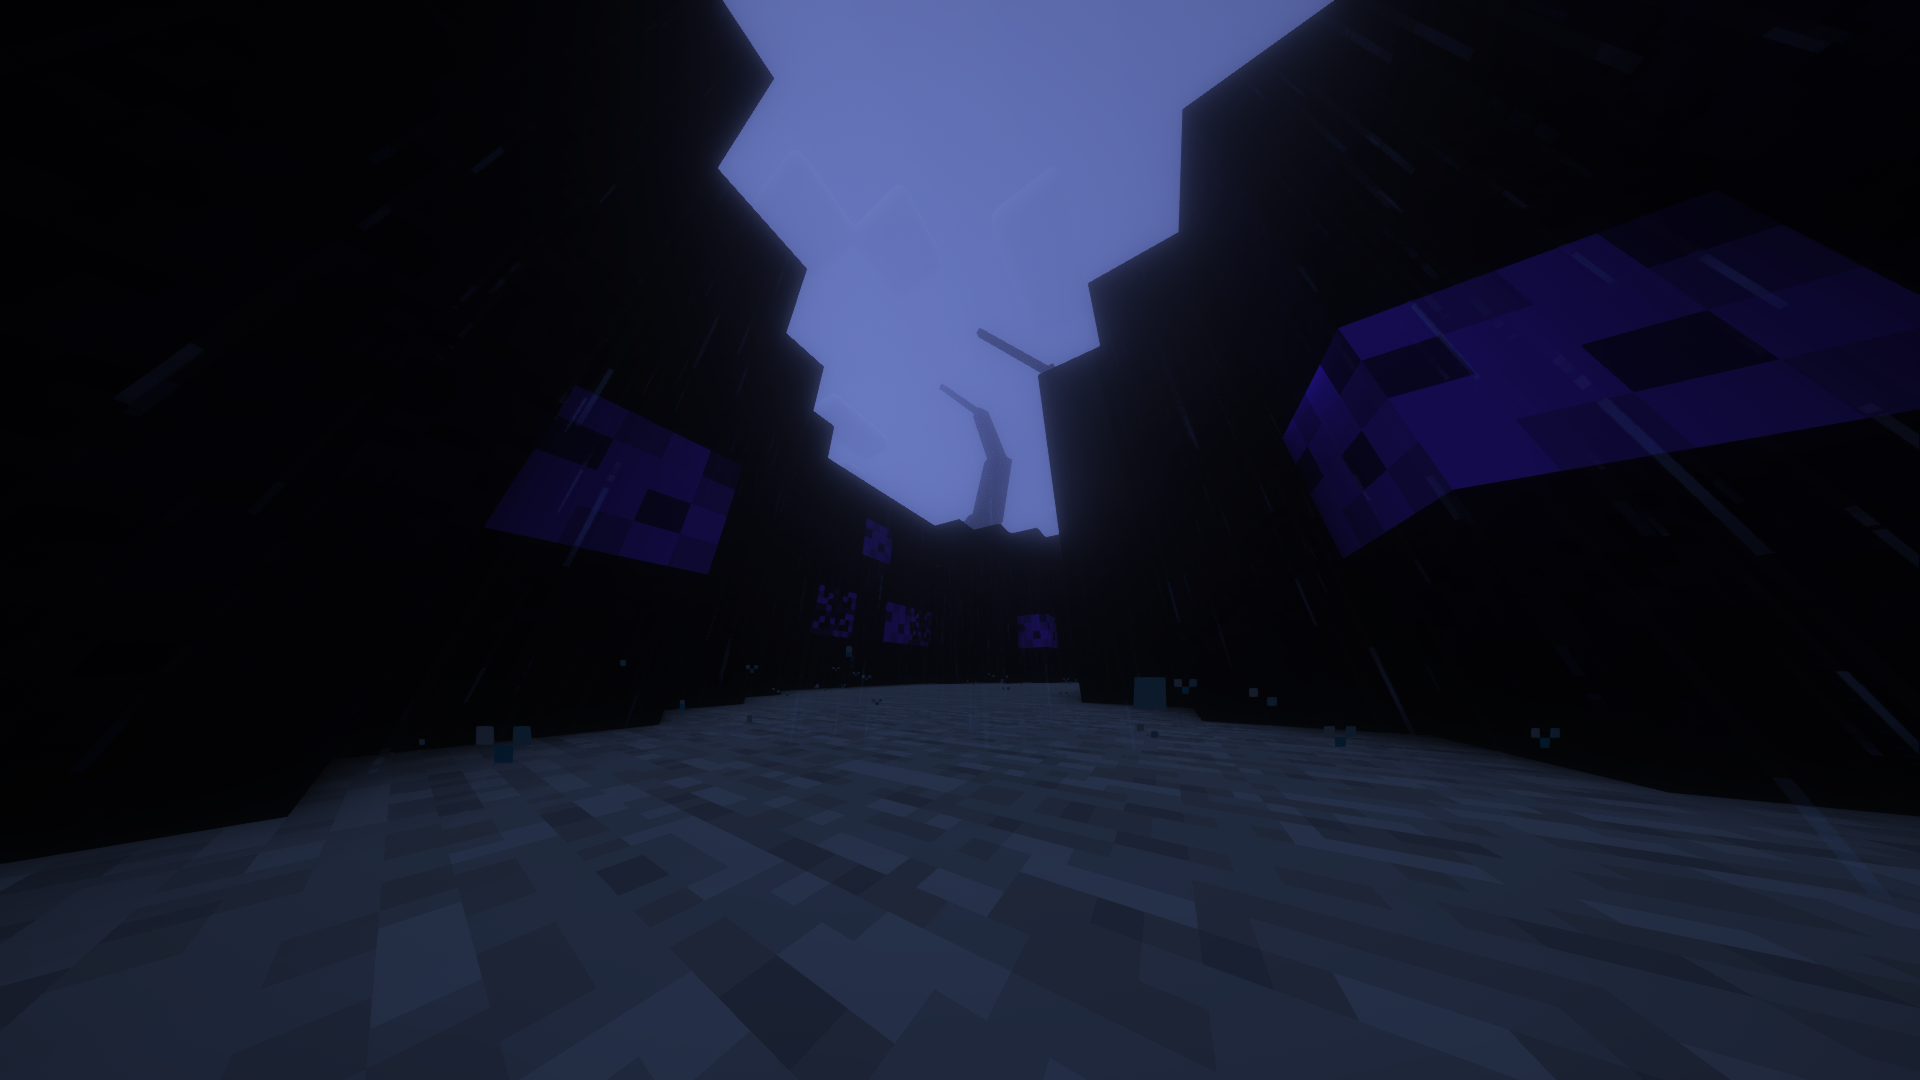 Download Minecraft Wither Storm Battle Wallpaper